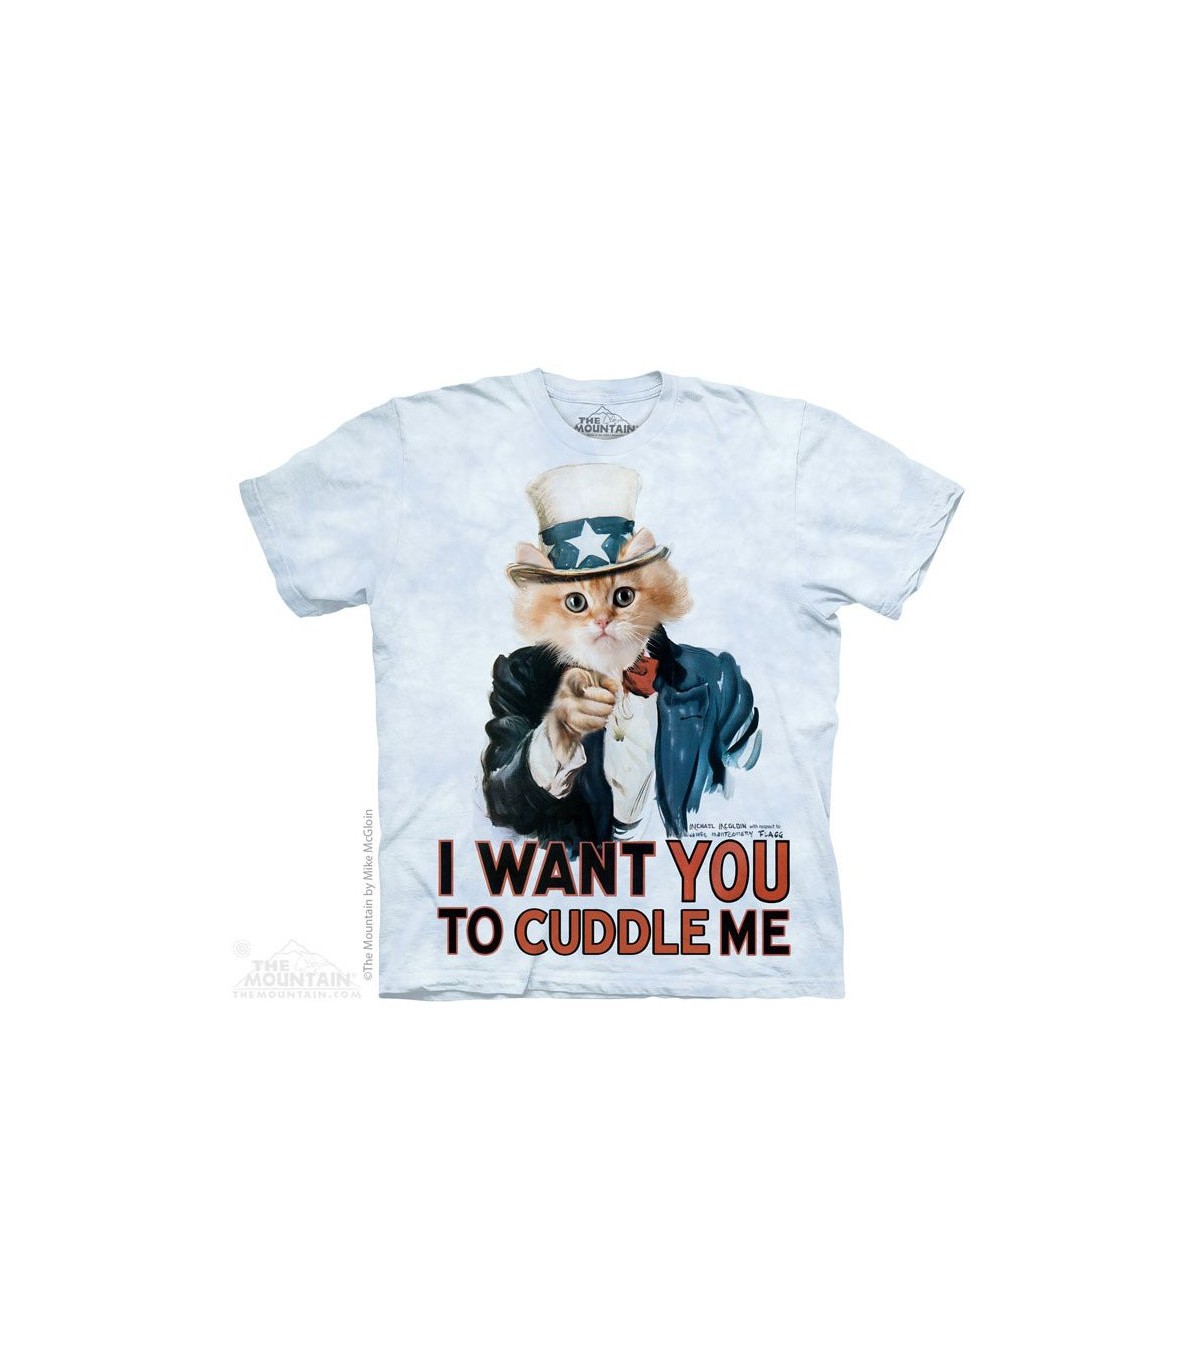 Cuddle Me Humorous Cat T Shirt The Mountain